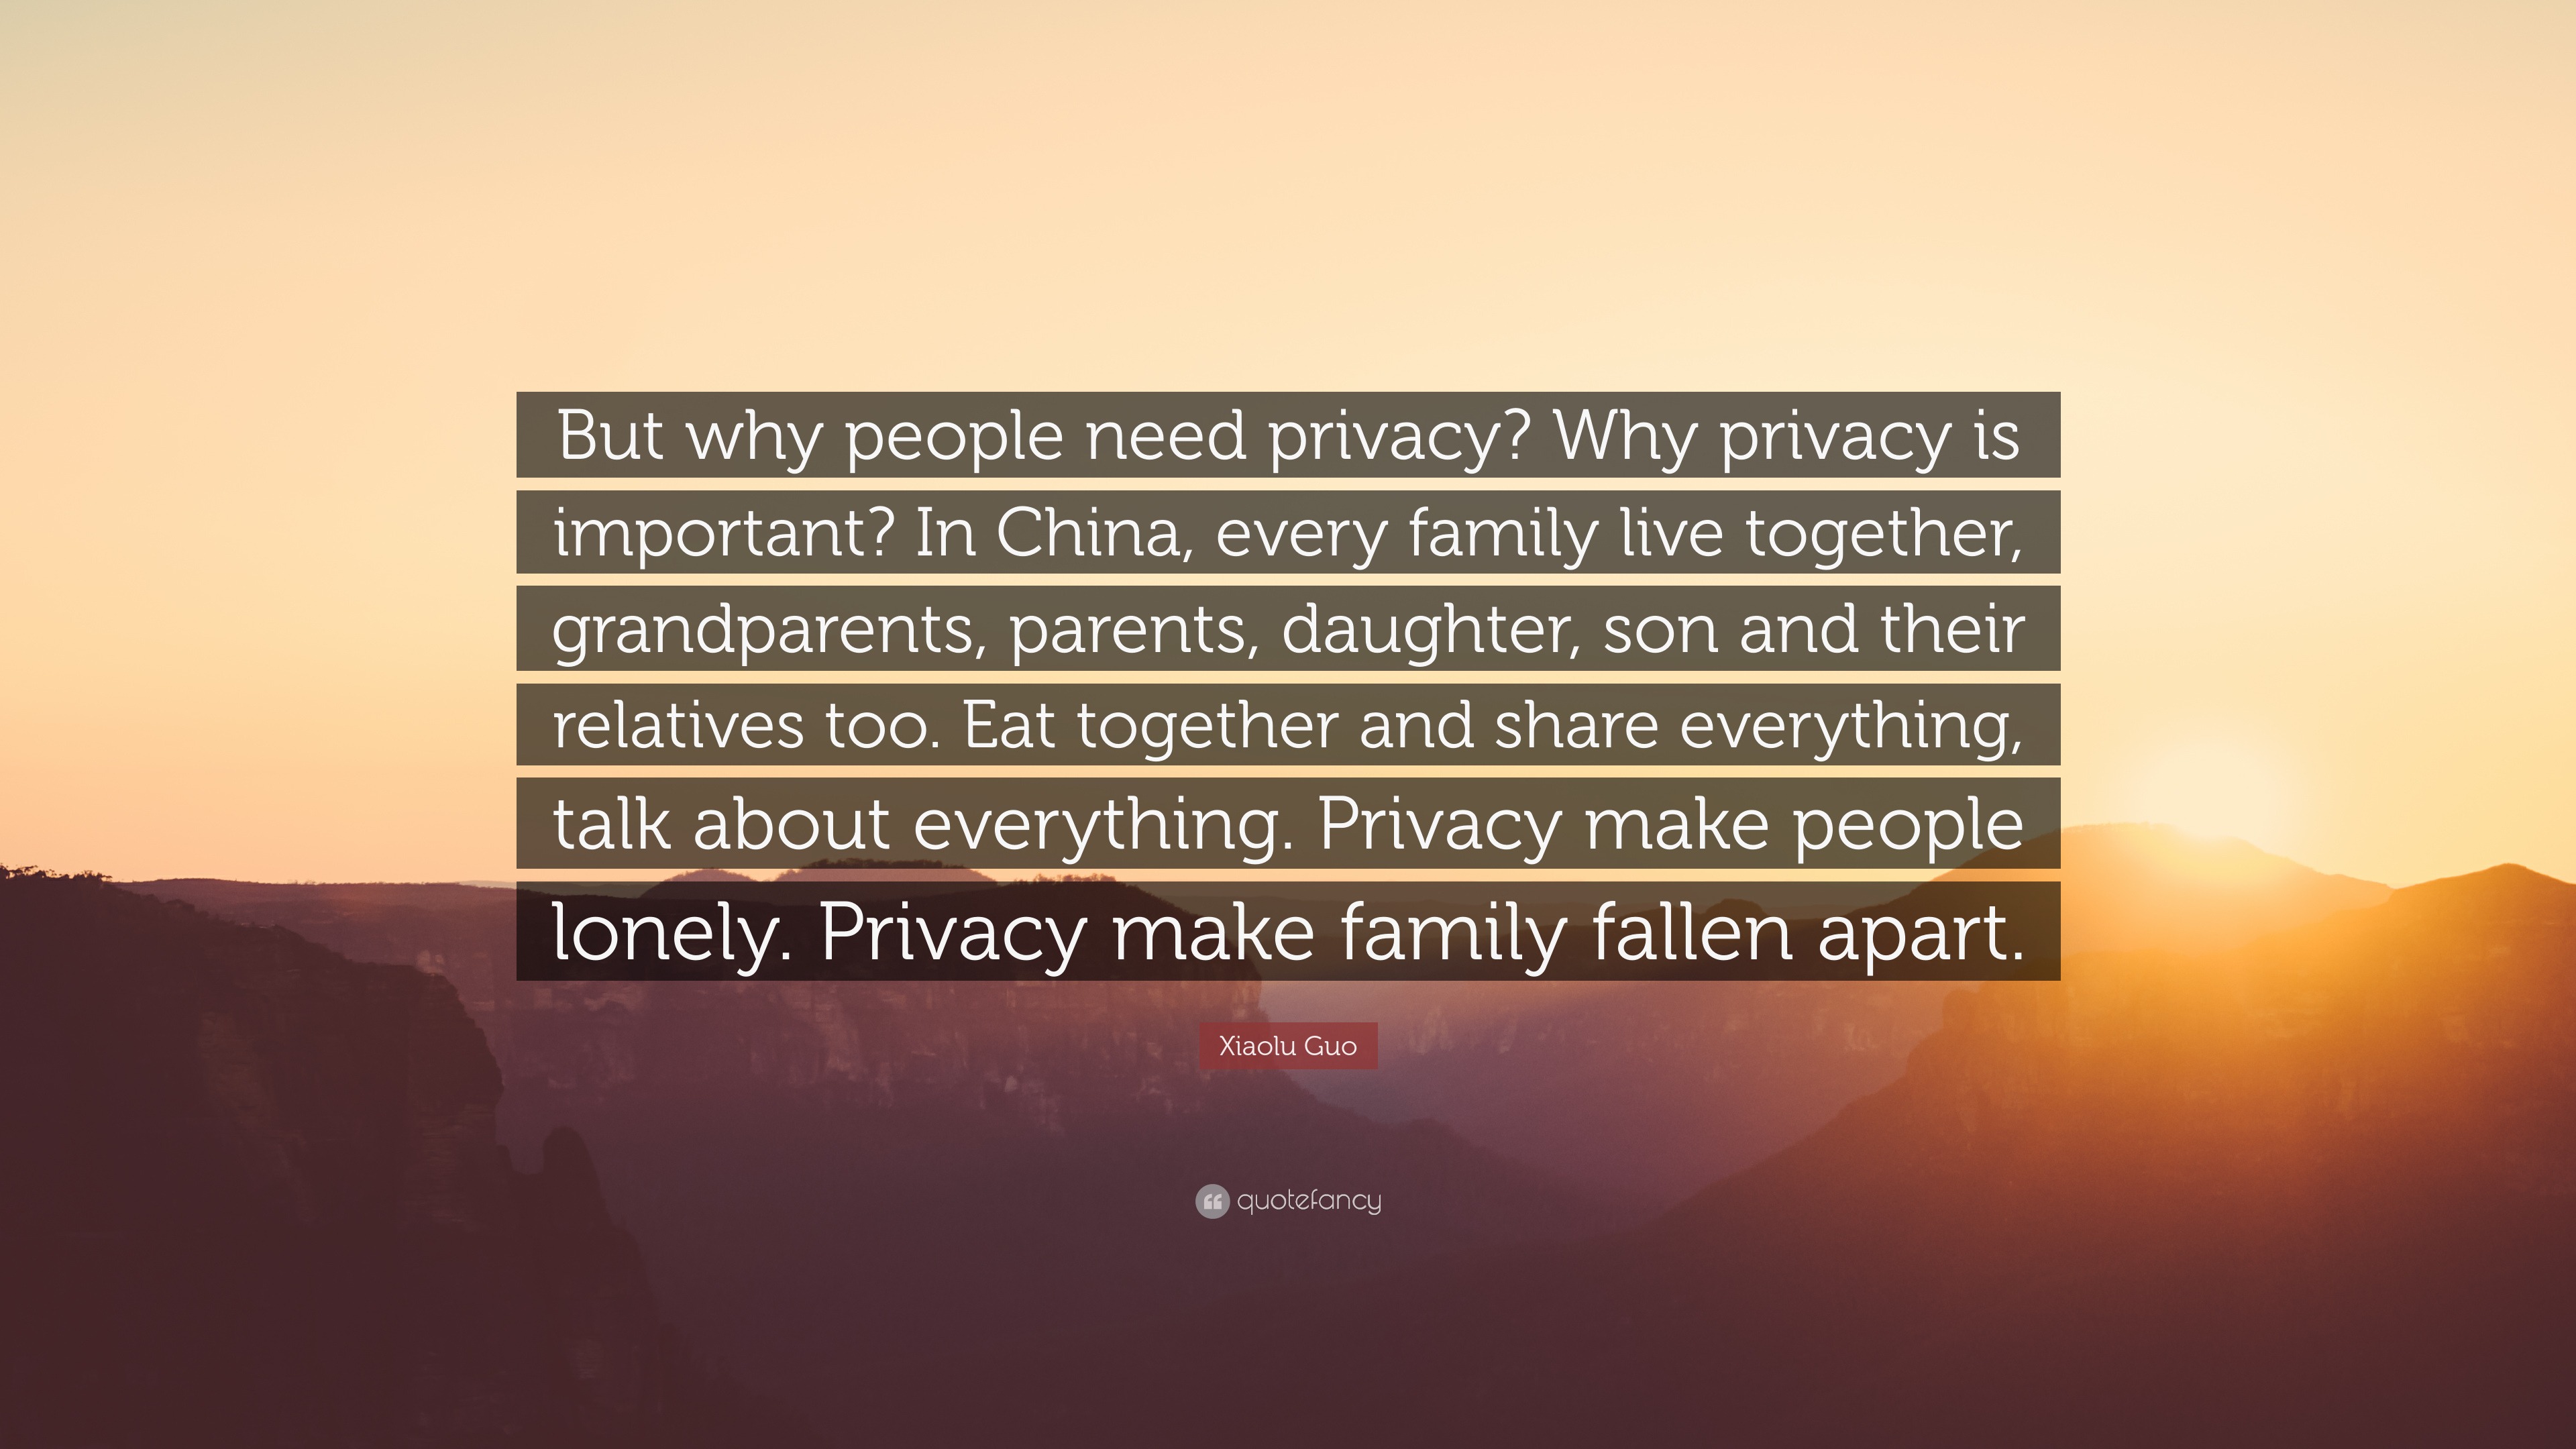 Why is family privacy important?